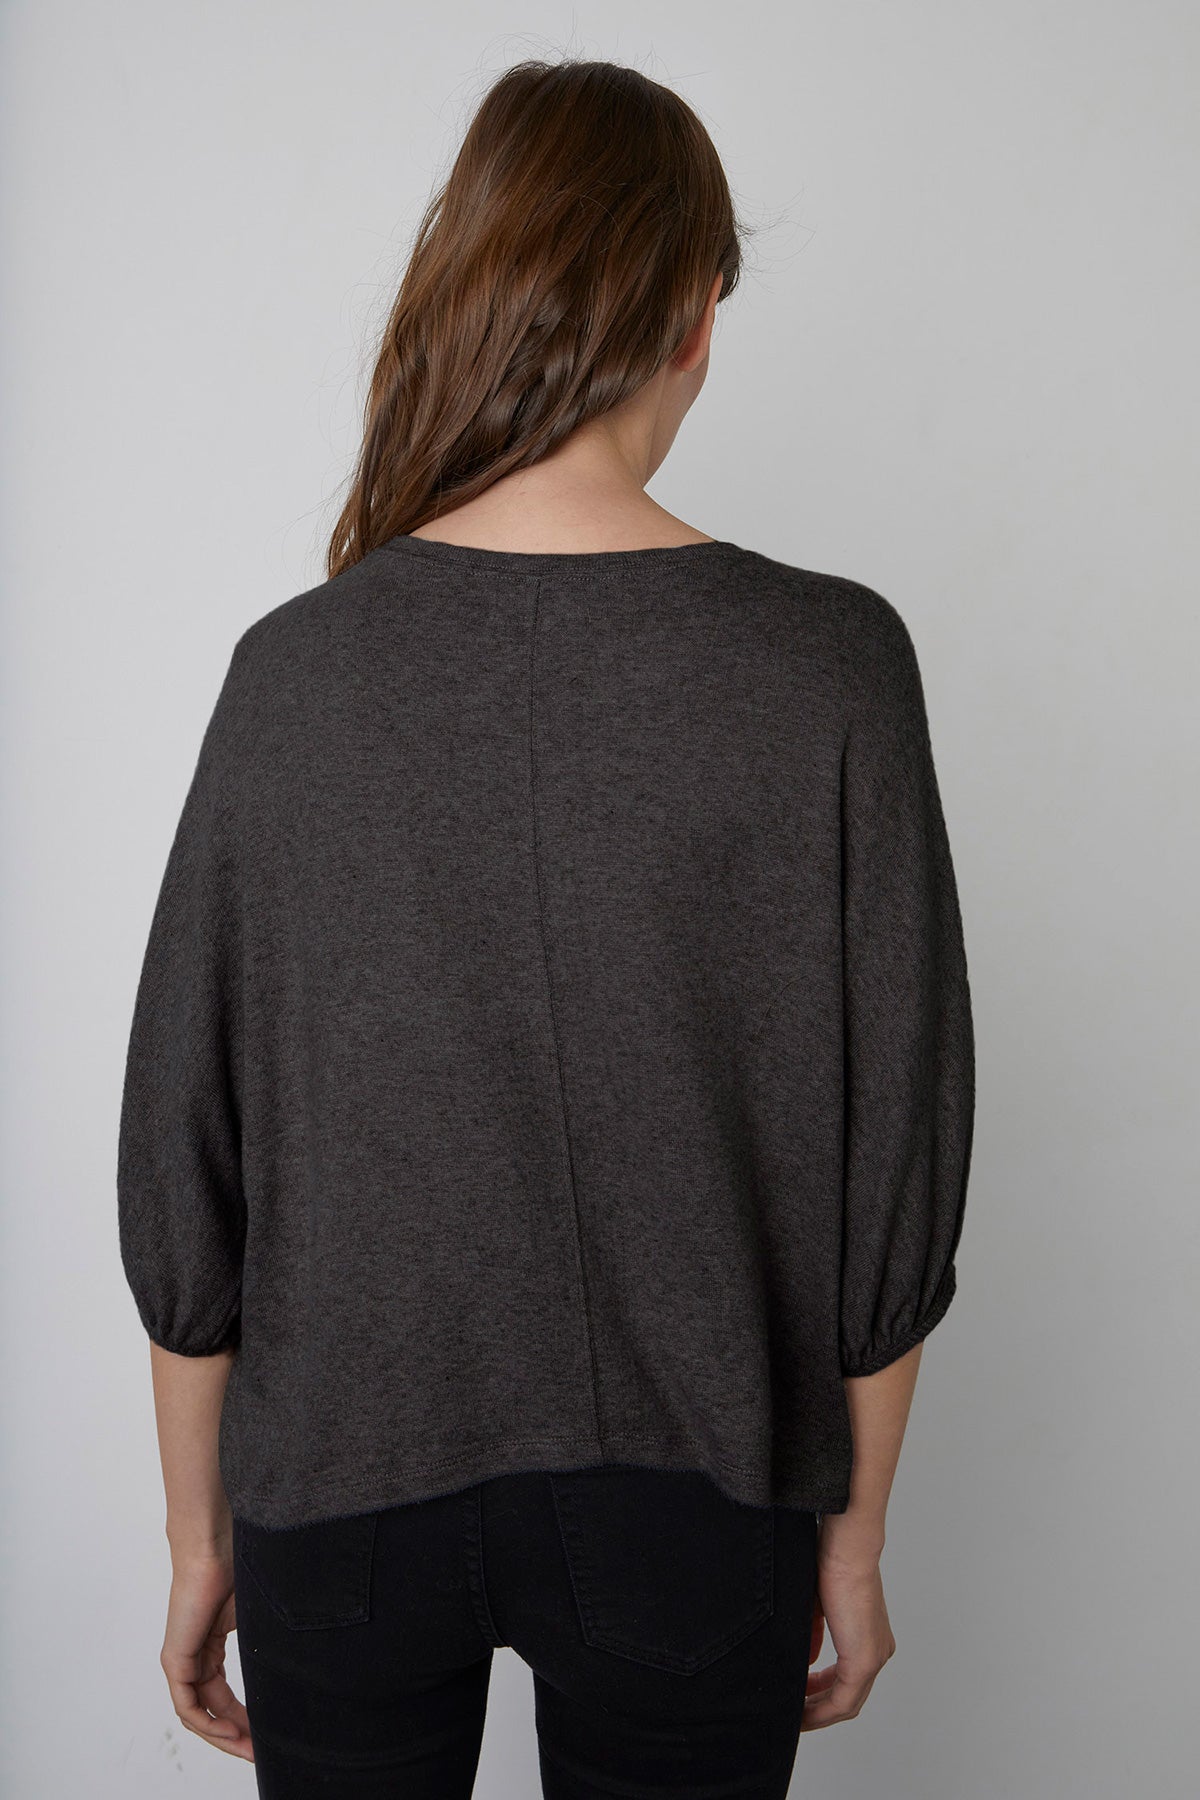 Makayla Crew Neck Pullover in anthracite back-25052494790849